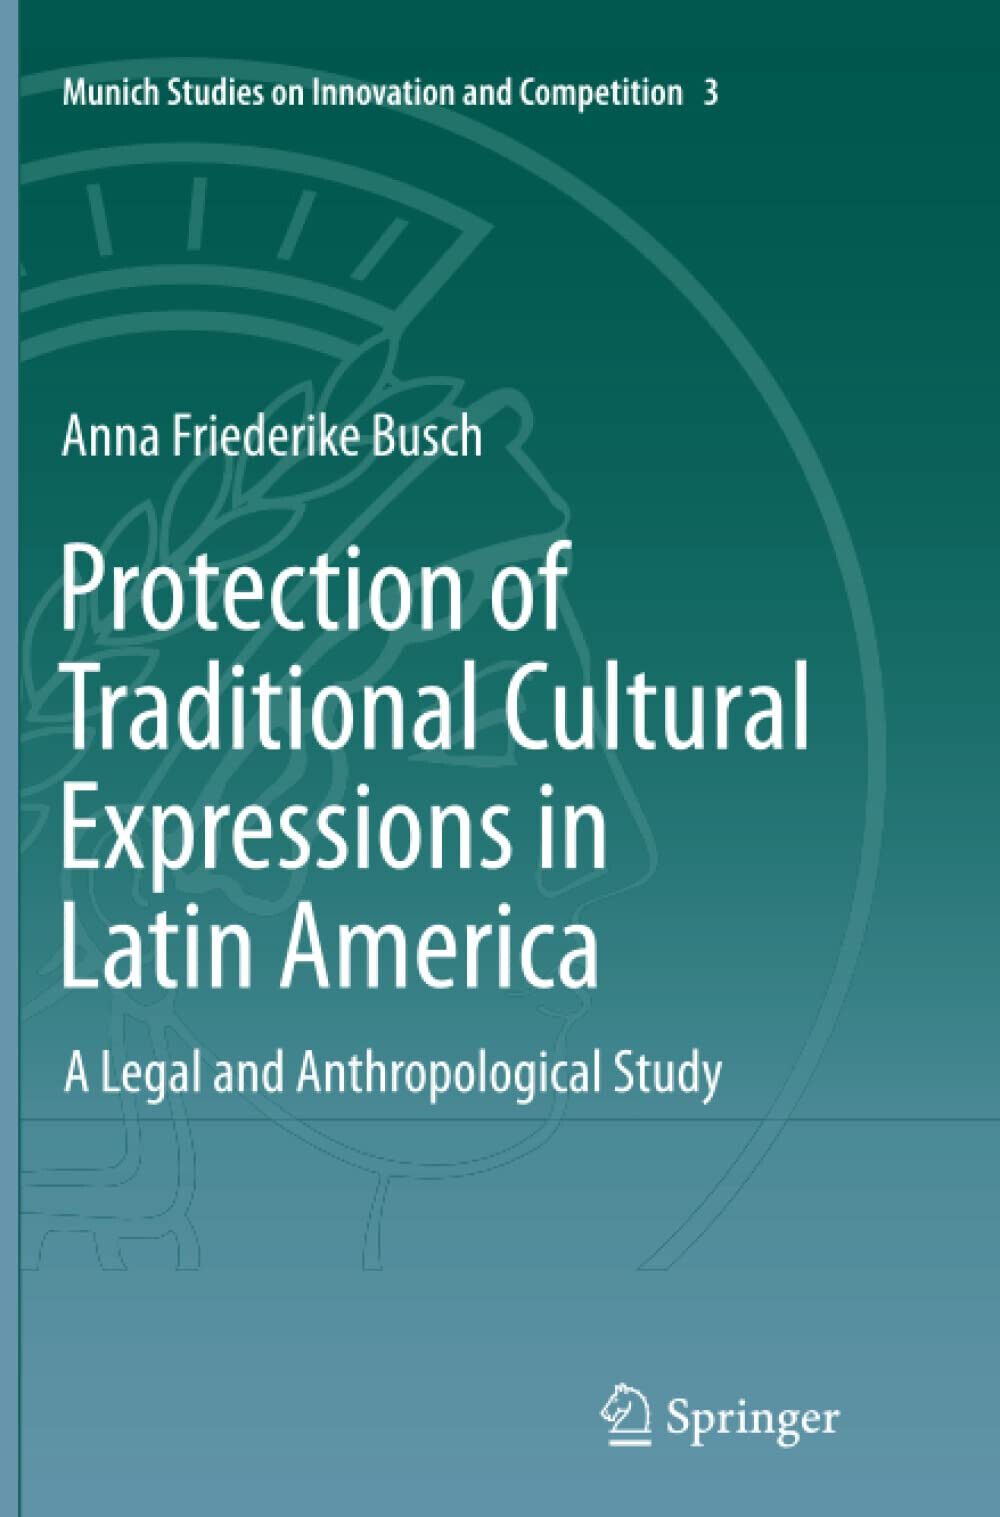 Protection of Traditional Cultural Expressions in Latin America - Springer, 2016